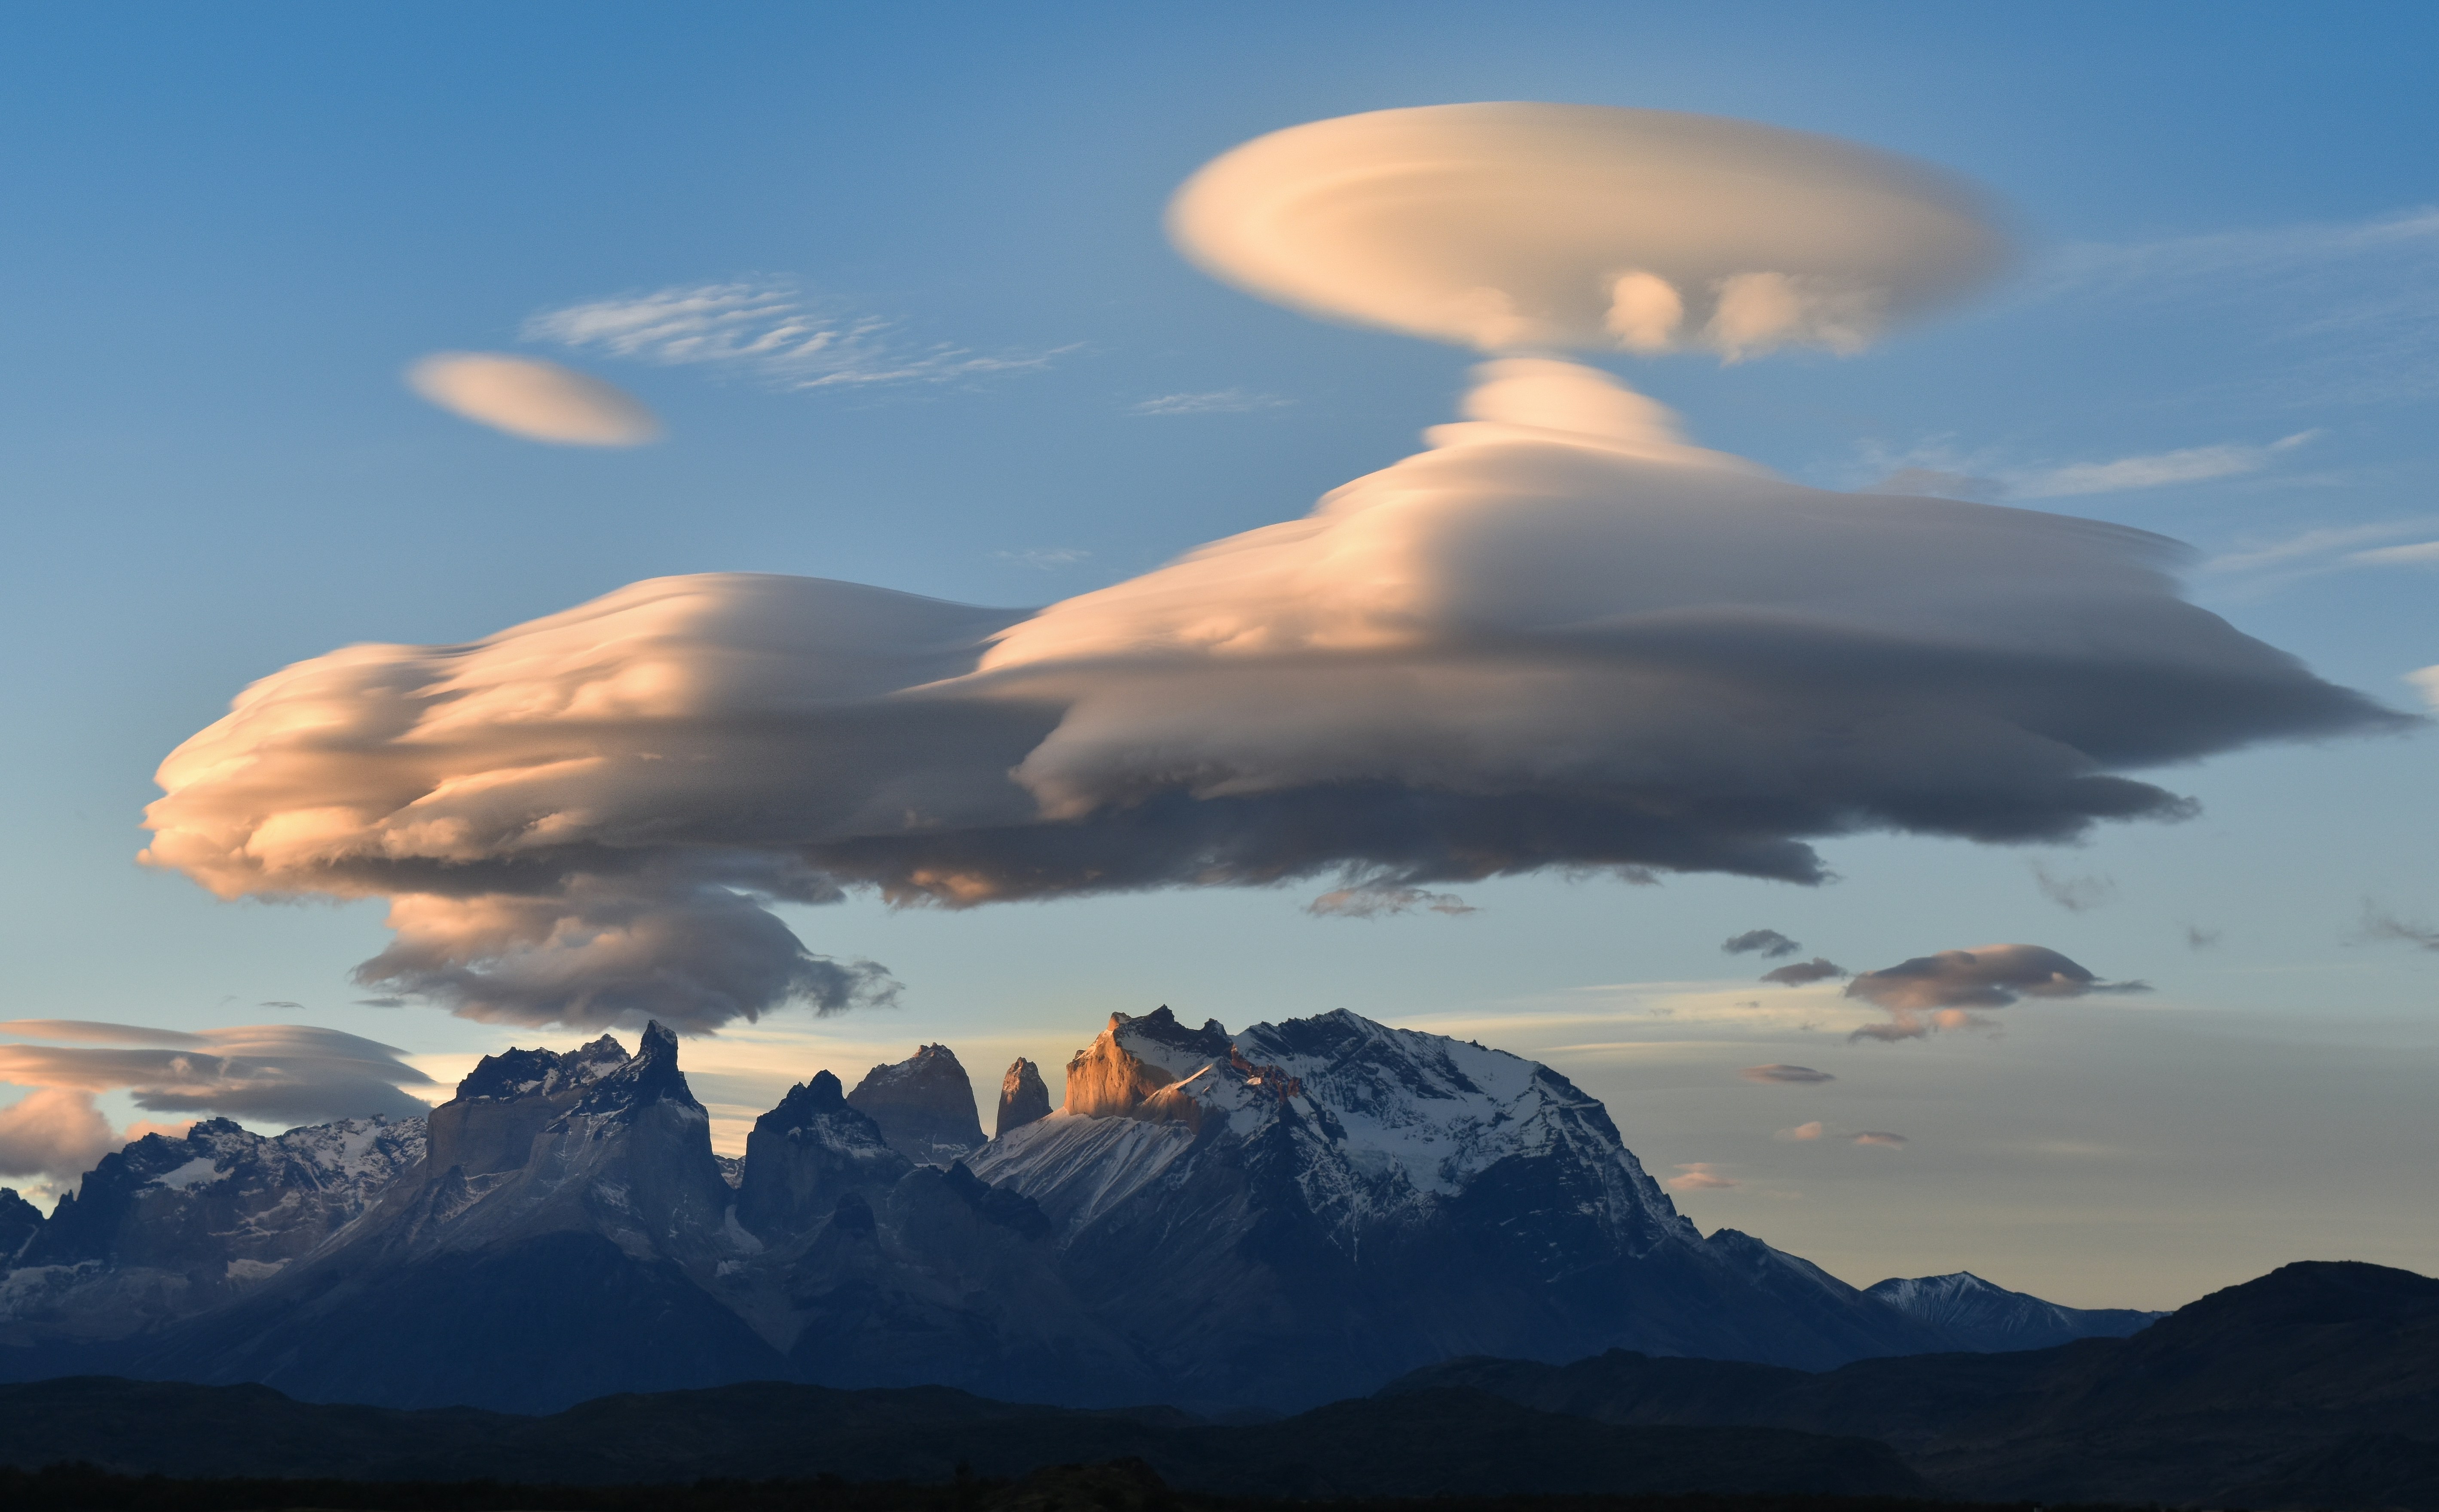 Chantilly clouds over Cuernos del Paine